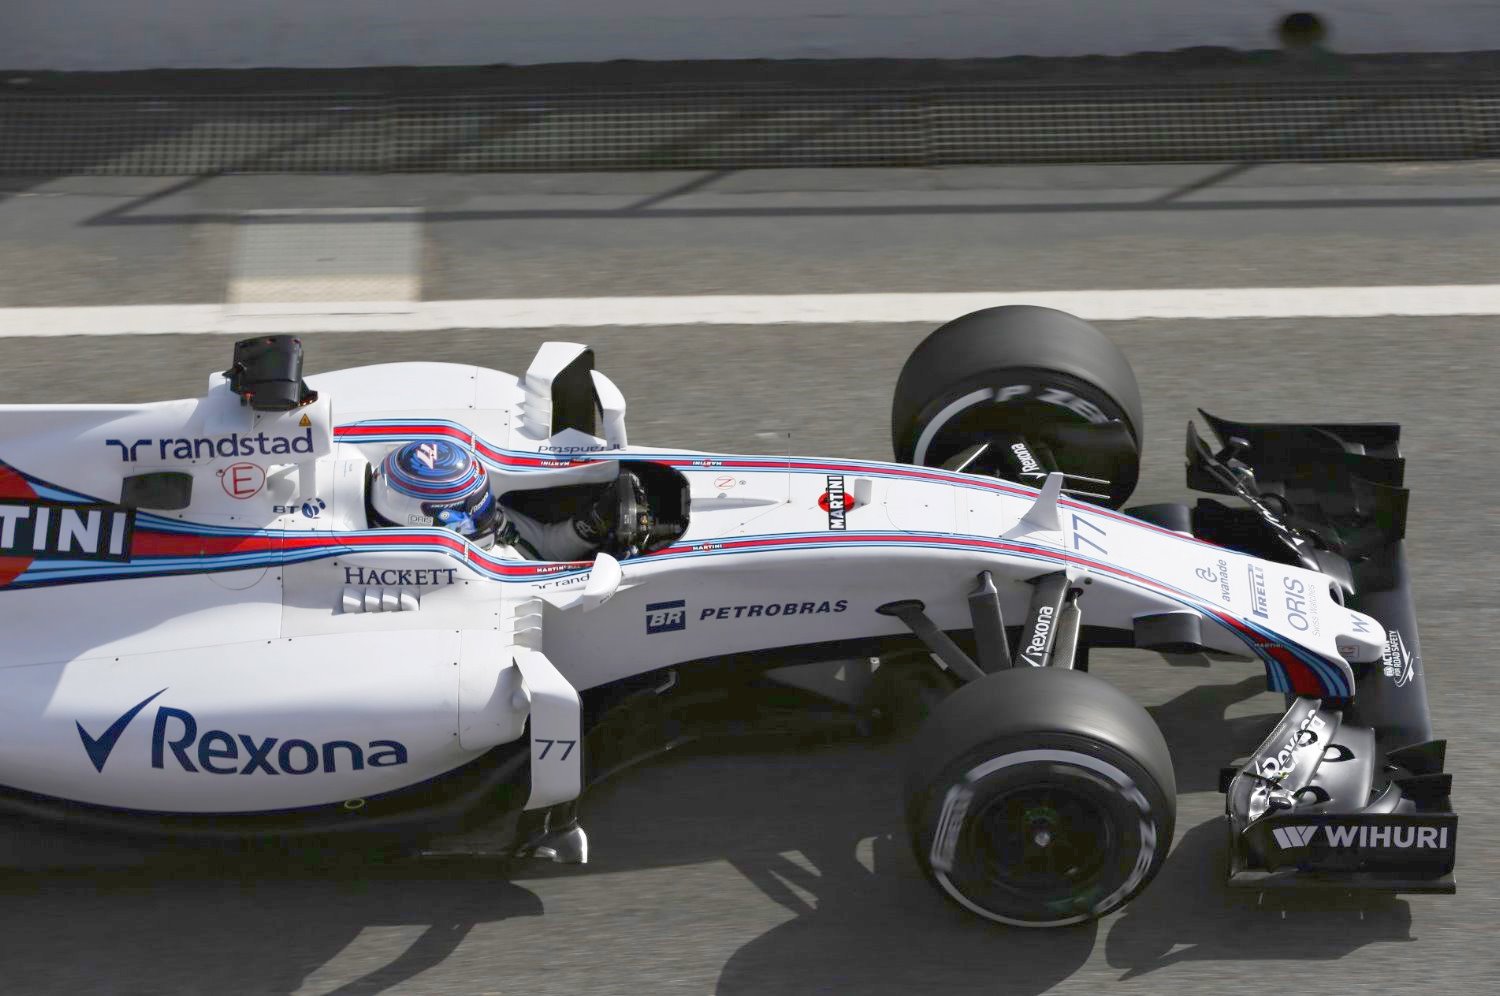 Bottas in the new Williams - the new car appears to losing ground to Mercedes and Ferrari